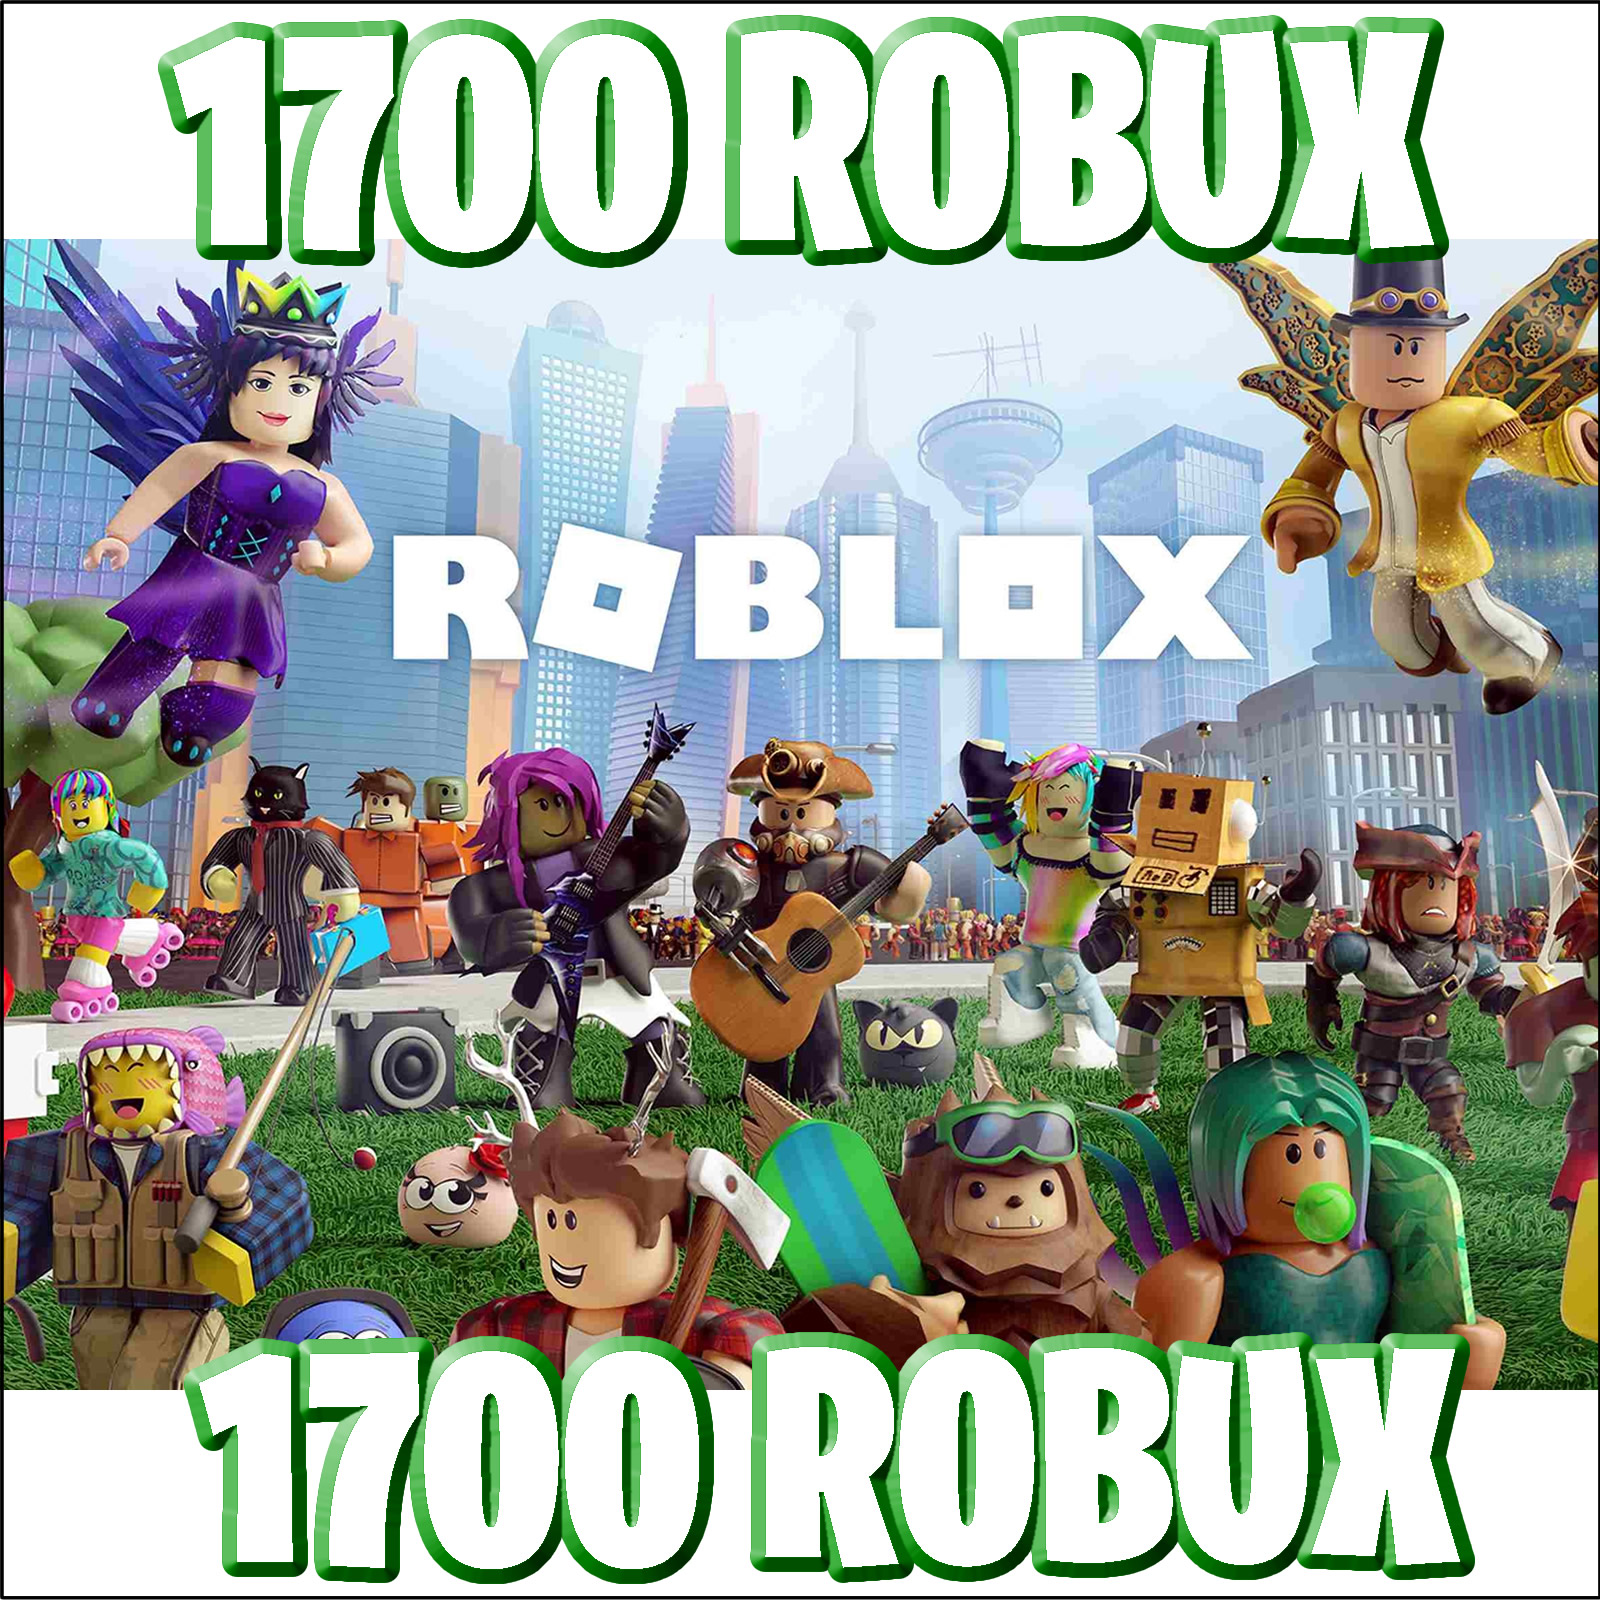 1700 Robux - 22500 robux xbox one buy online and track price xb